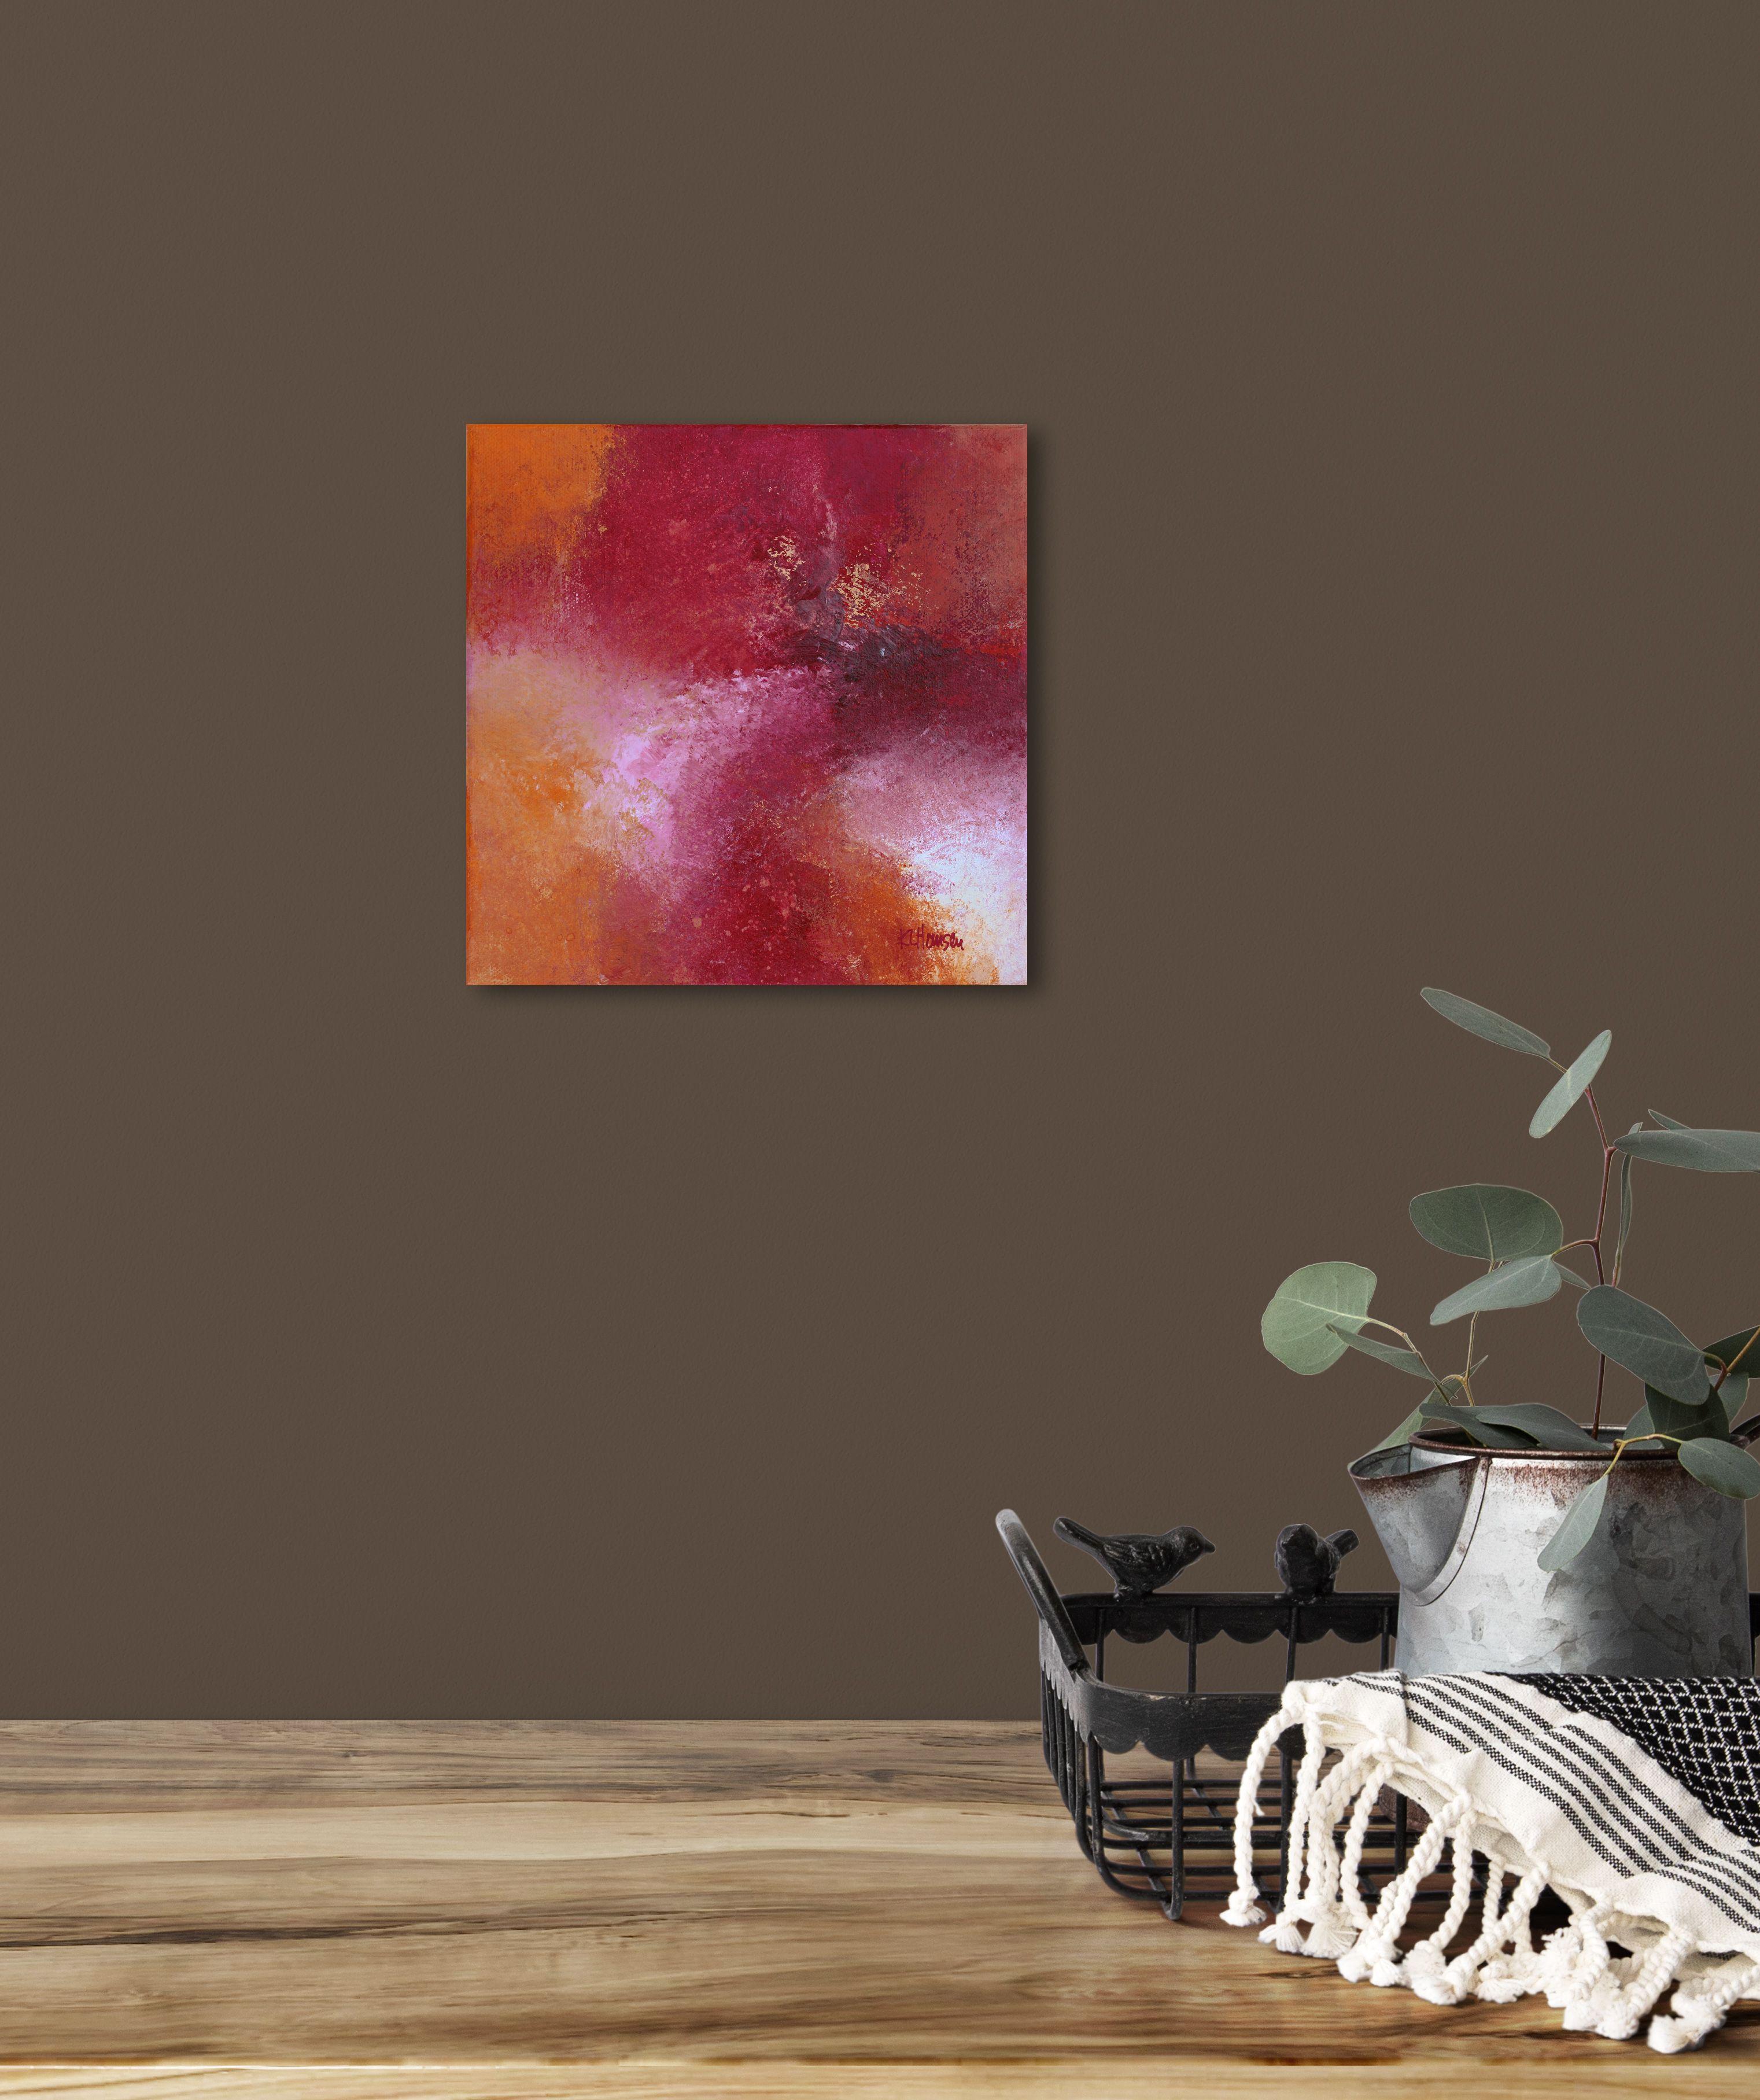 This small painting was created with a very limited palette from warm oranges to the cool pinks. It was painted for the sheer joy of playing with those colors. The atmospheric quality of the image, with its lost and found edges, adds a sense of